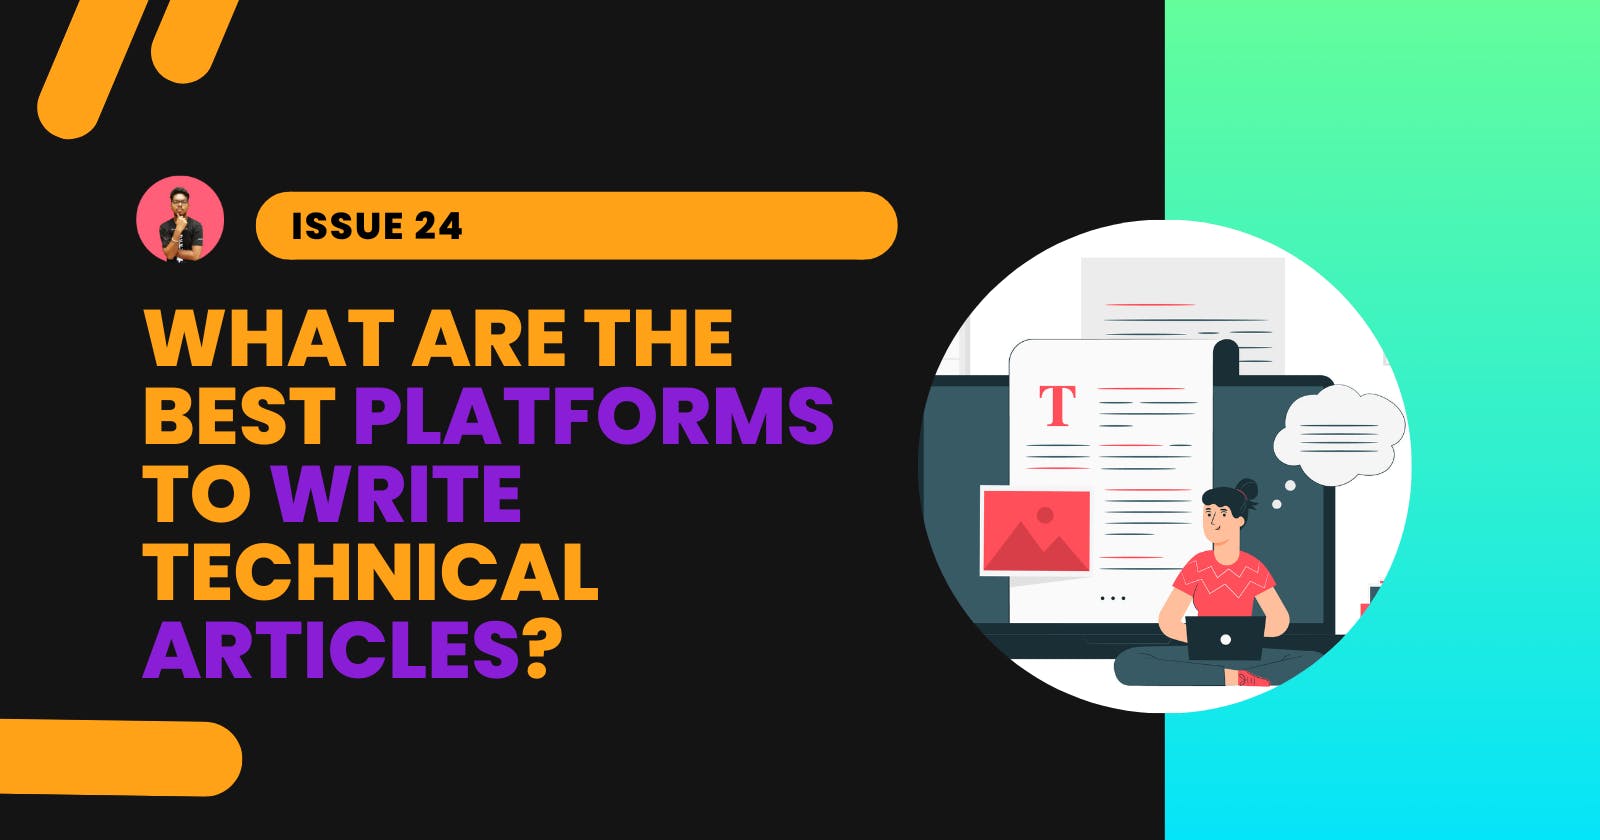 What are the best platforms to write technical articles?